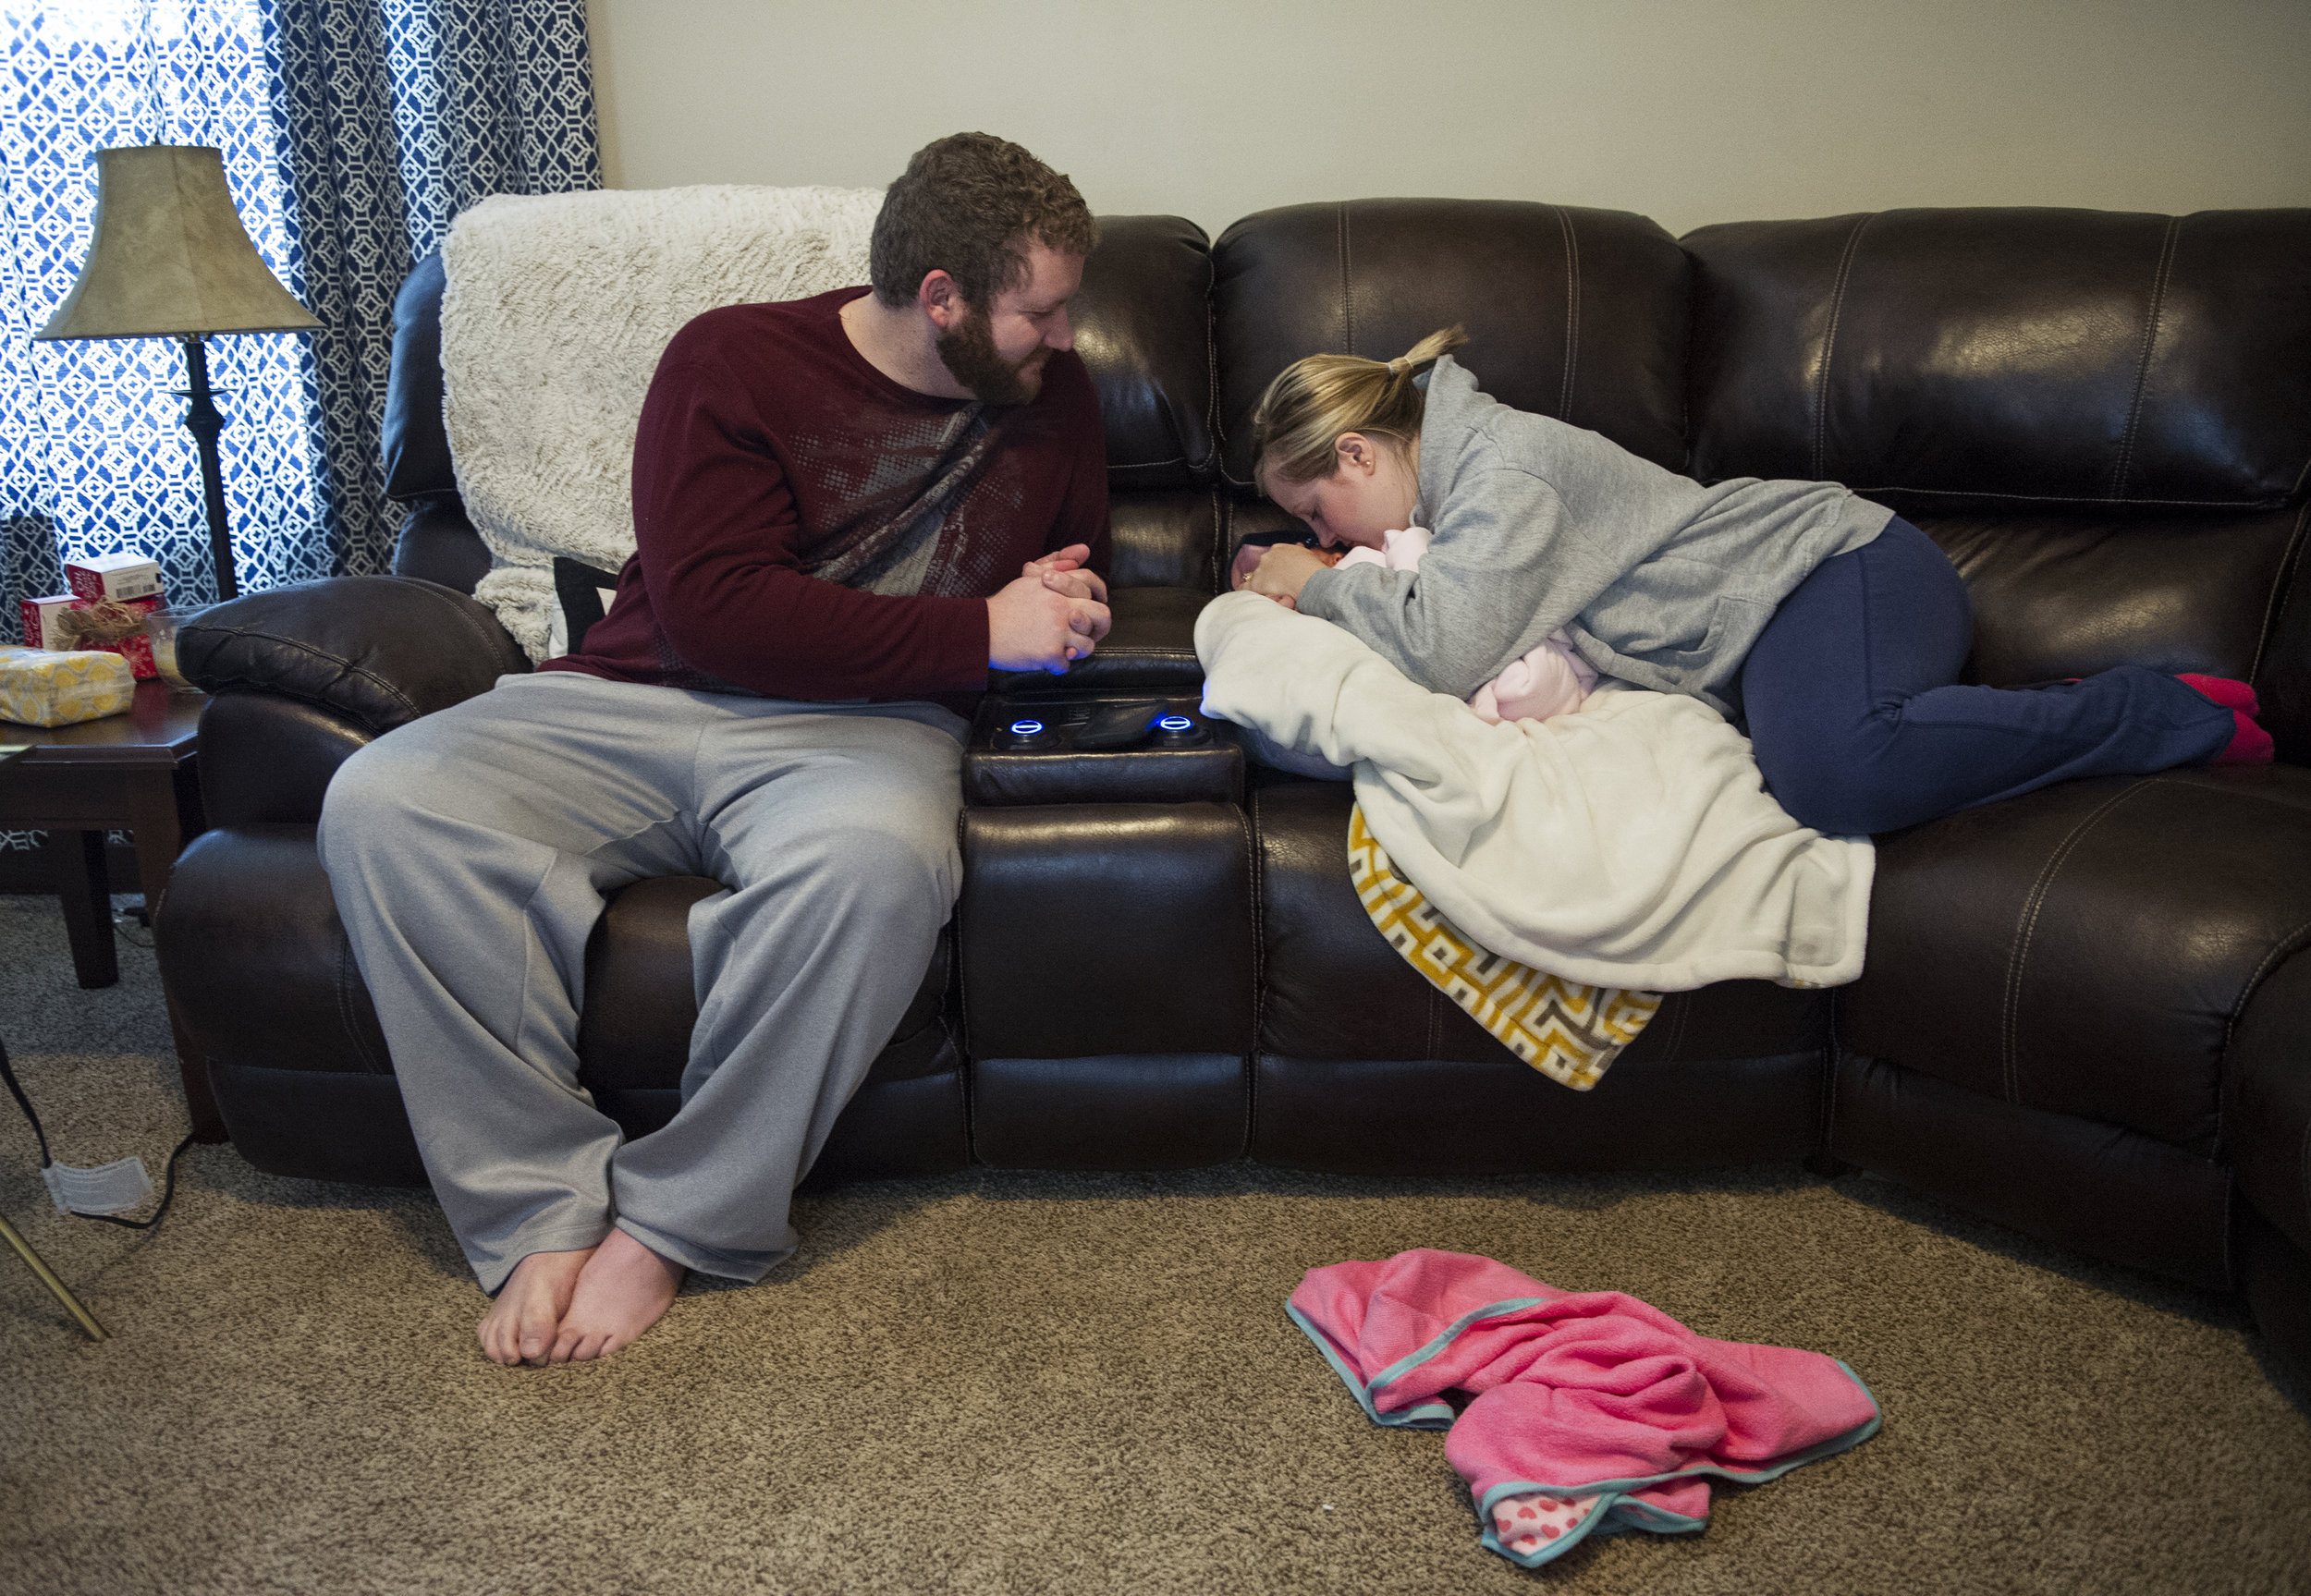  Michael and Erickia gush over Gracelyn at their home in Evansville Thursday Dec. 11, 2014. Since they brought her home they have spent their time enjoying getting to know her and showing her off to their friends and relatives. "My heart is overflowi